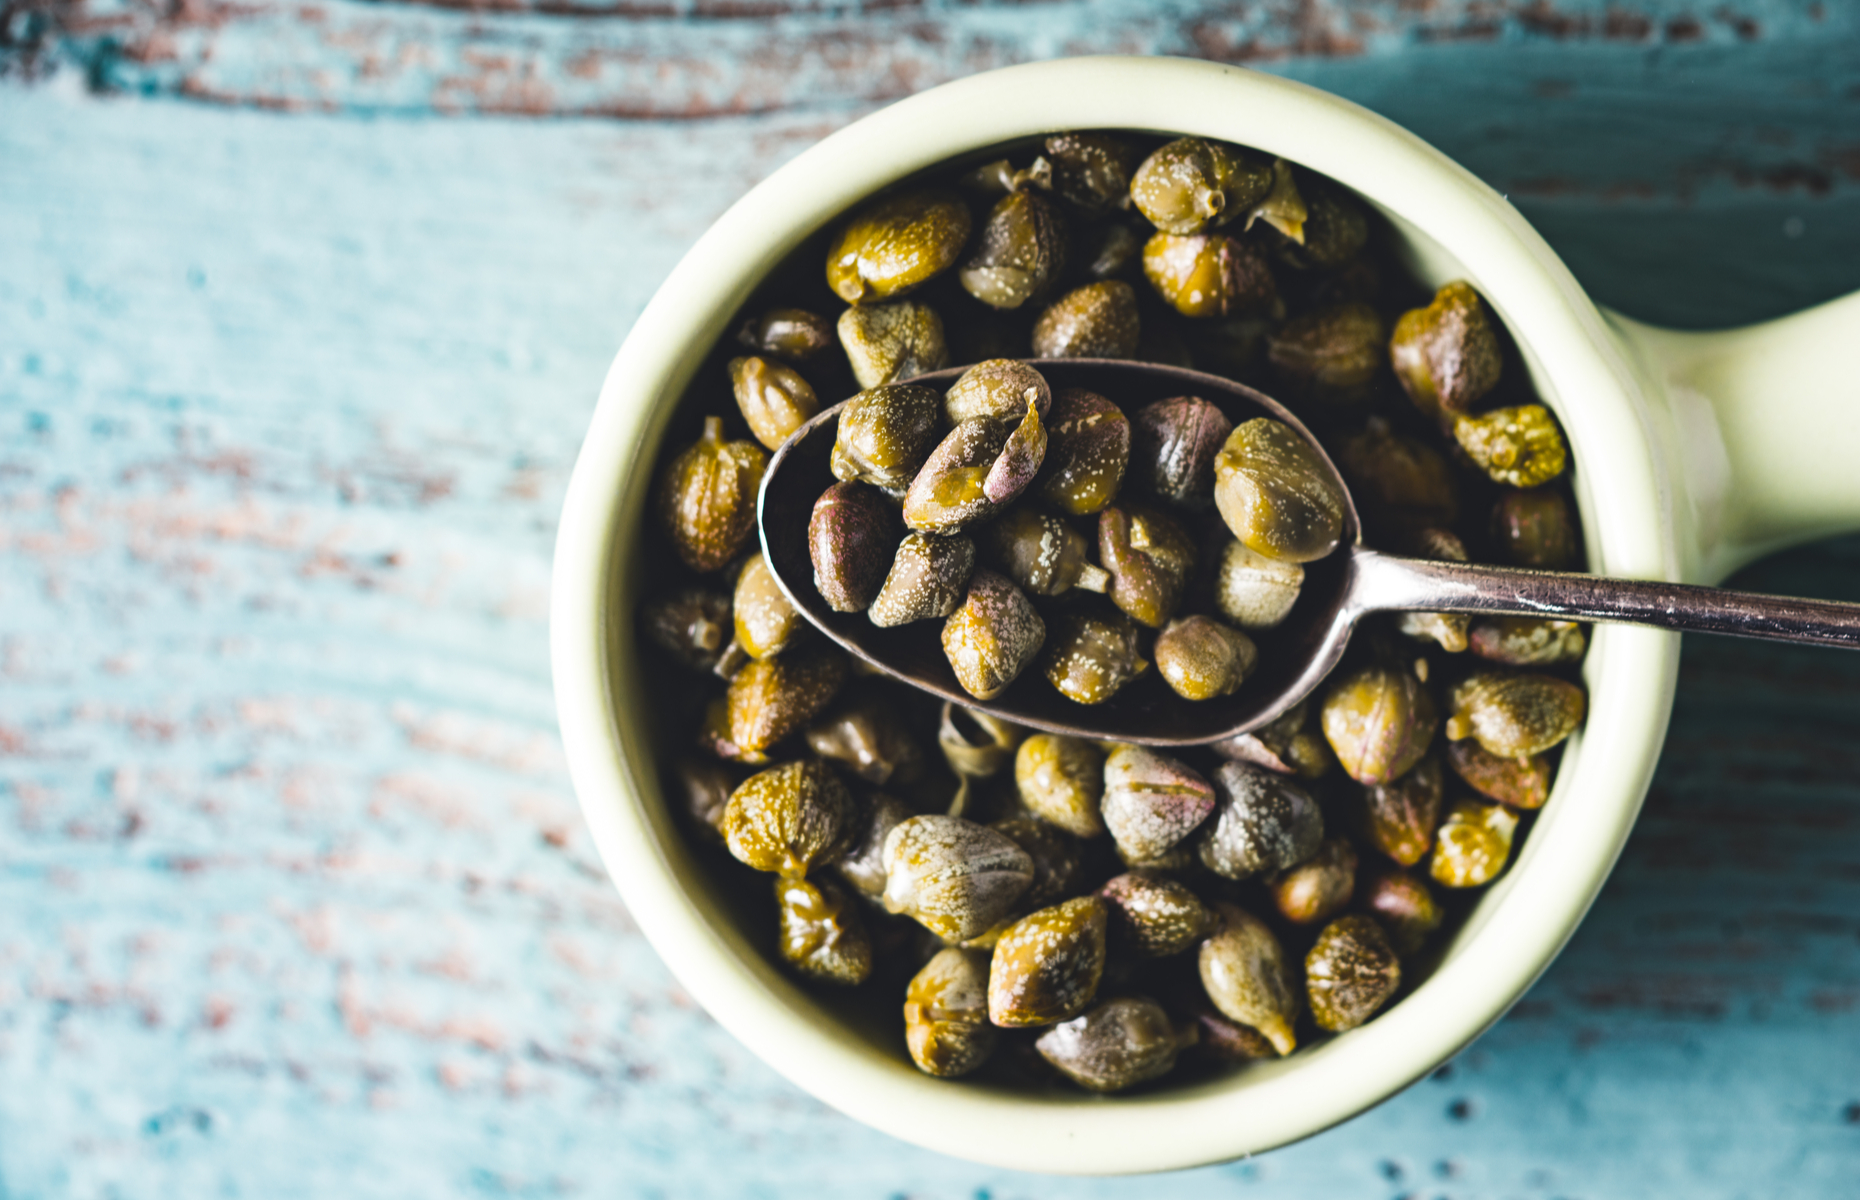 A bowl of capers (Image: Karpenkov Denis/Shutterstock)